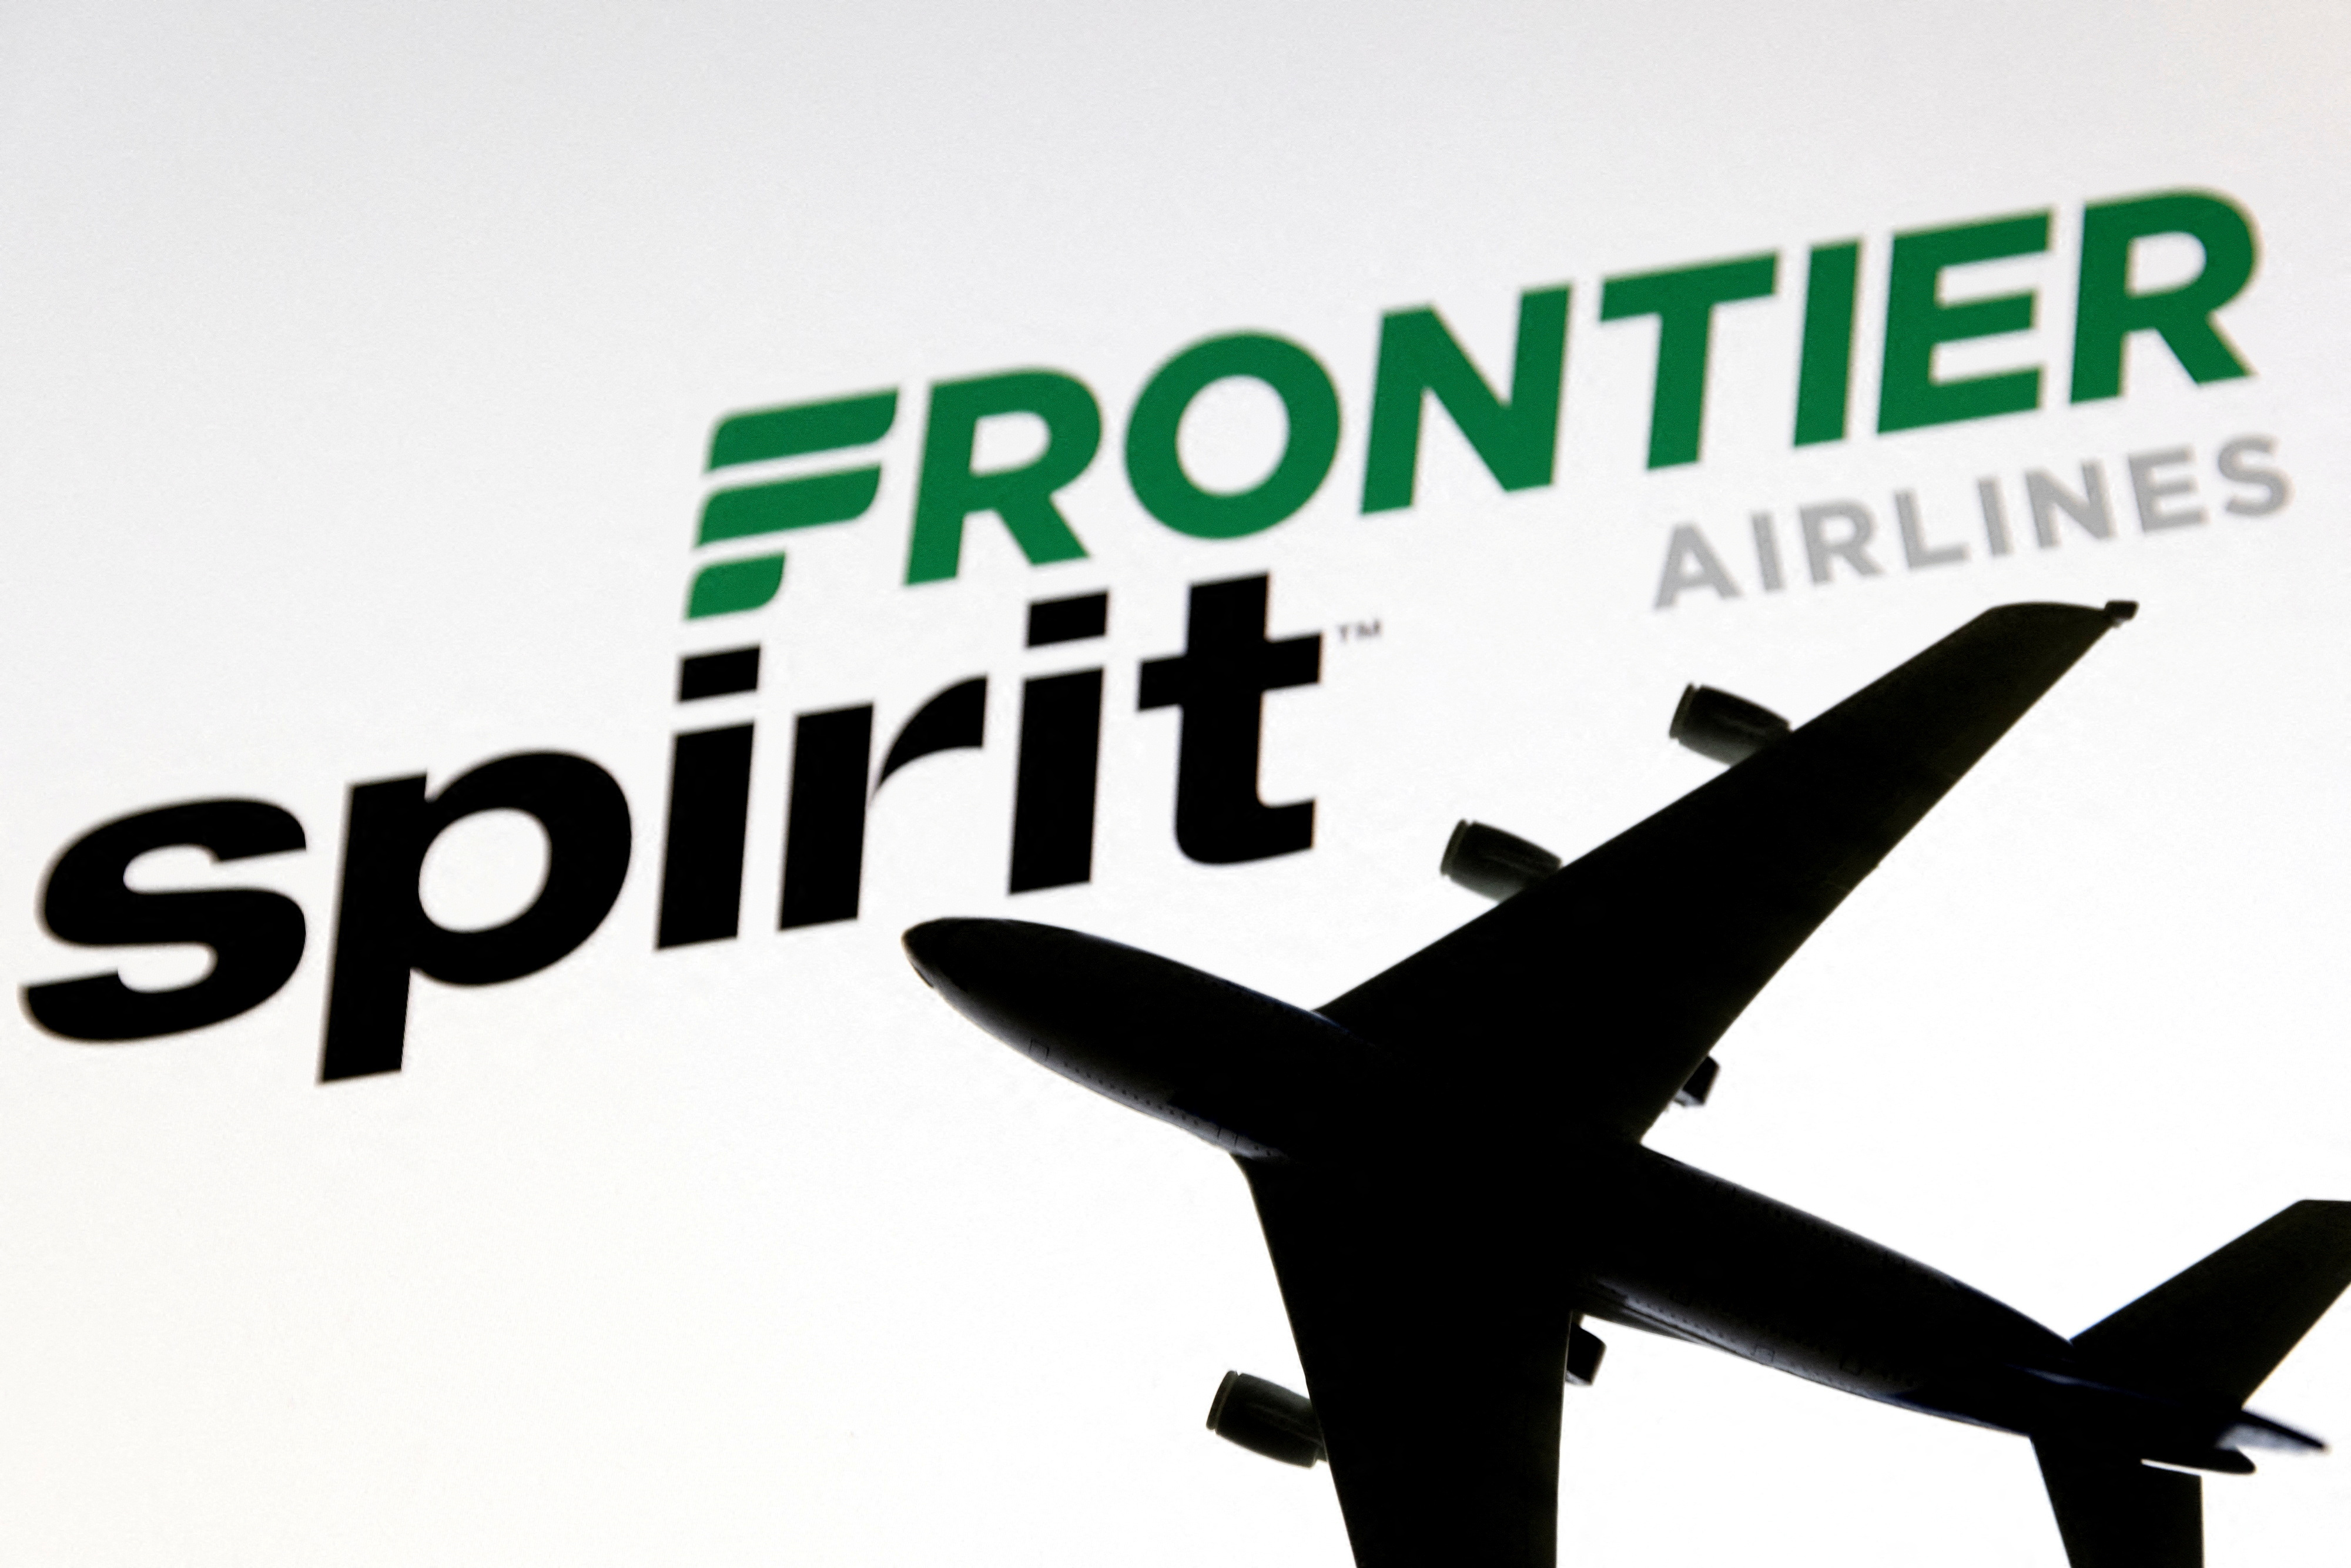 Frontier declines to further escalate bidding war for Spirit Airlines